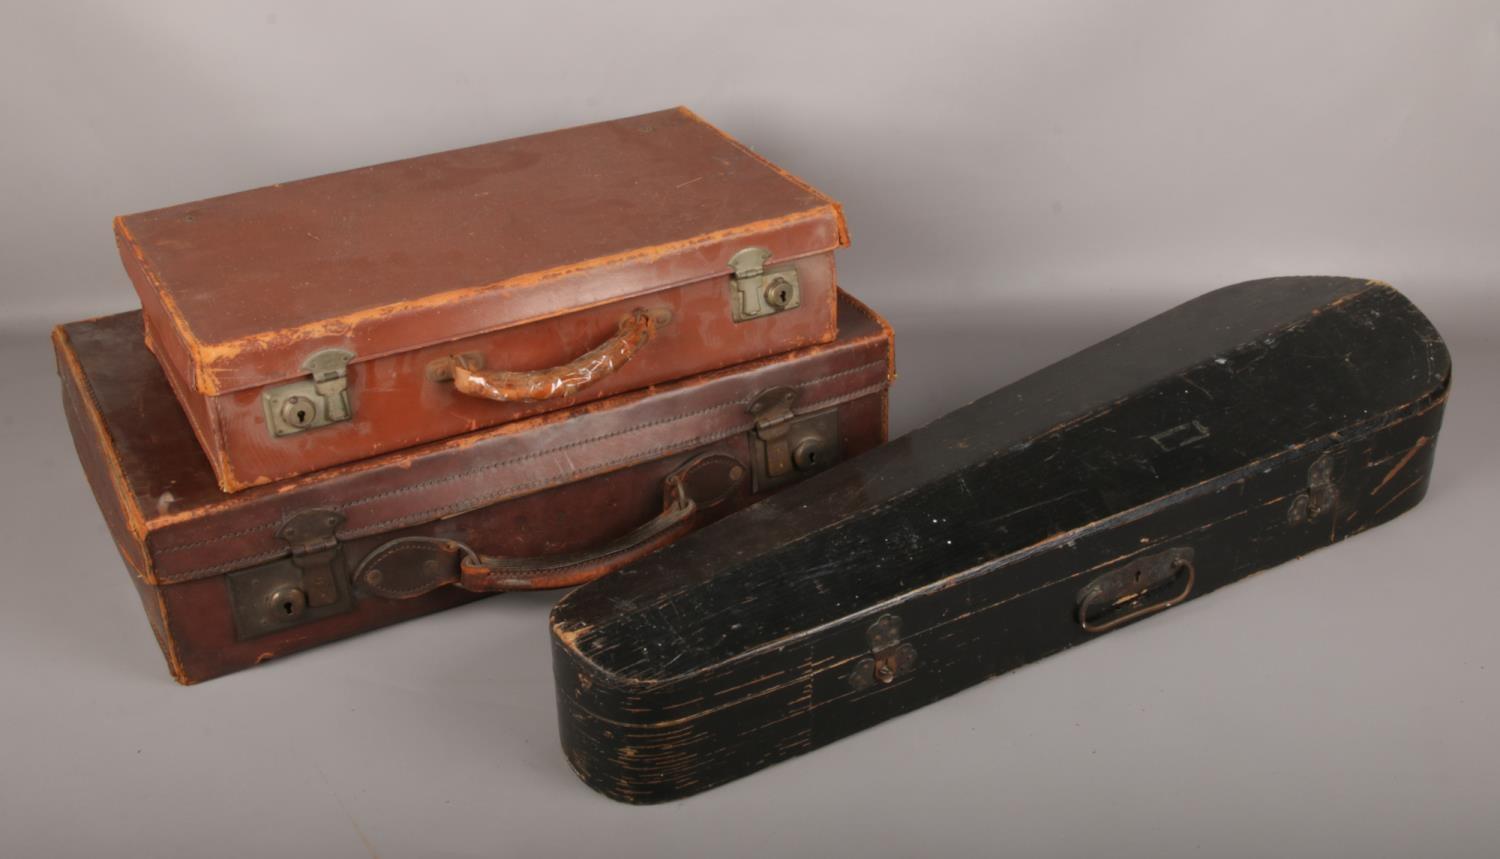 Two vintage suitcases and a wooden violin case.